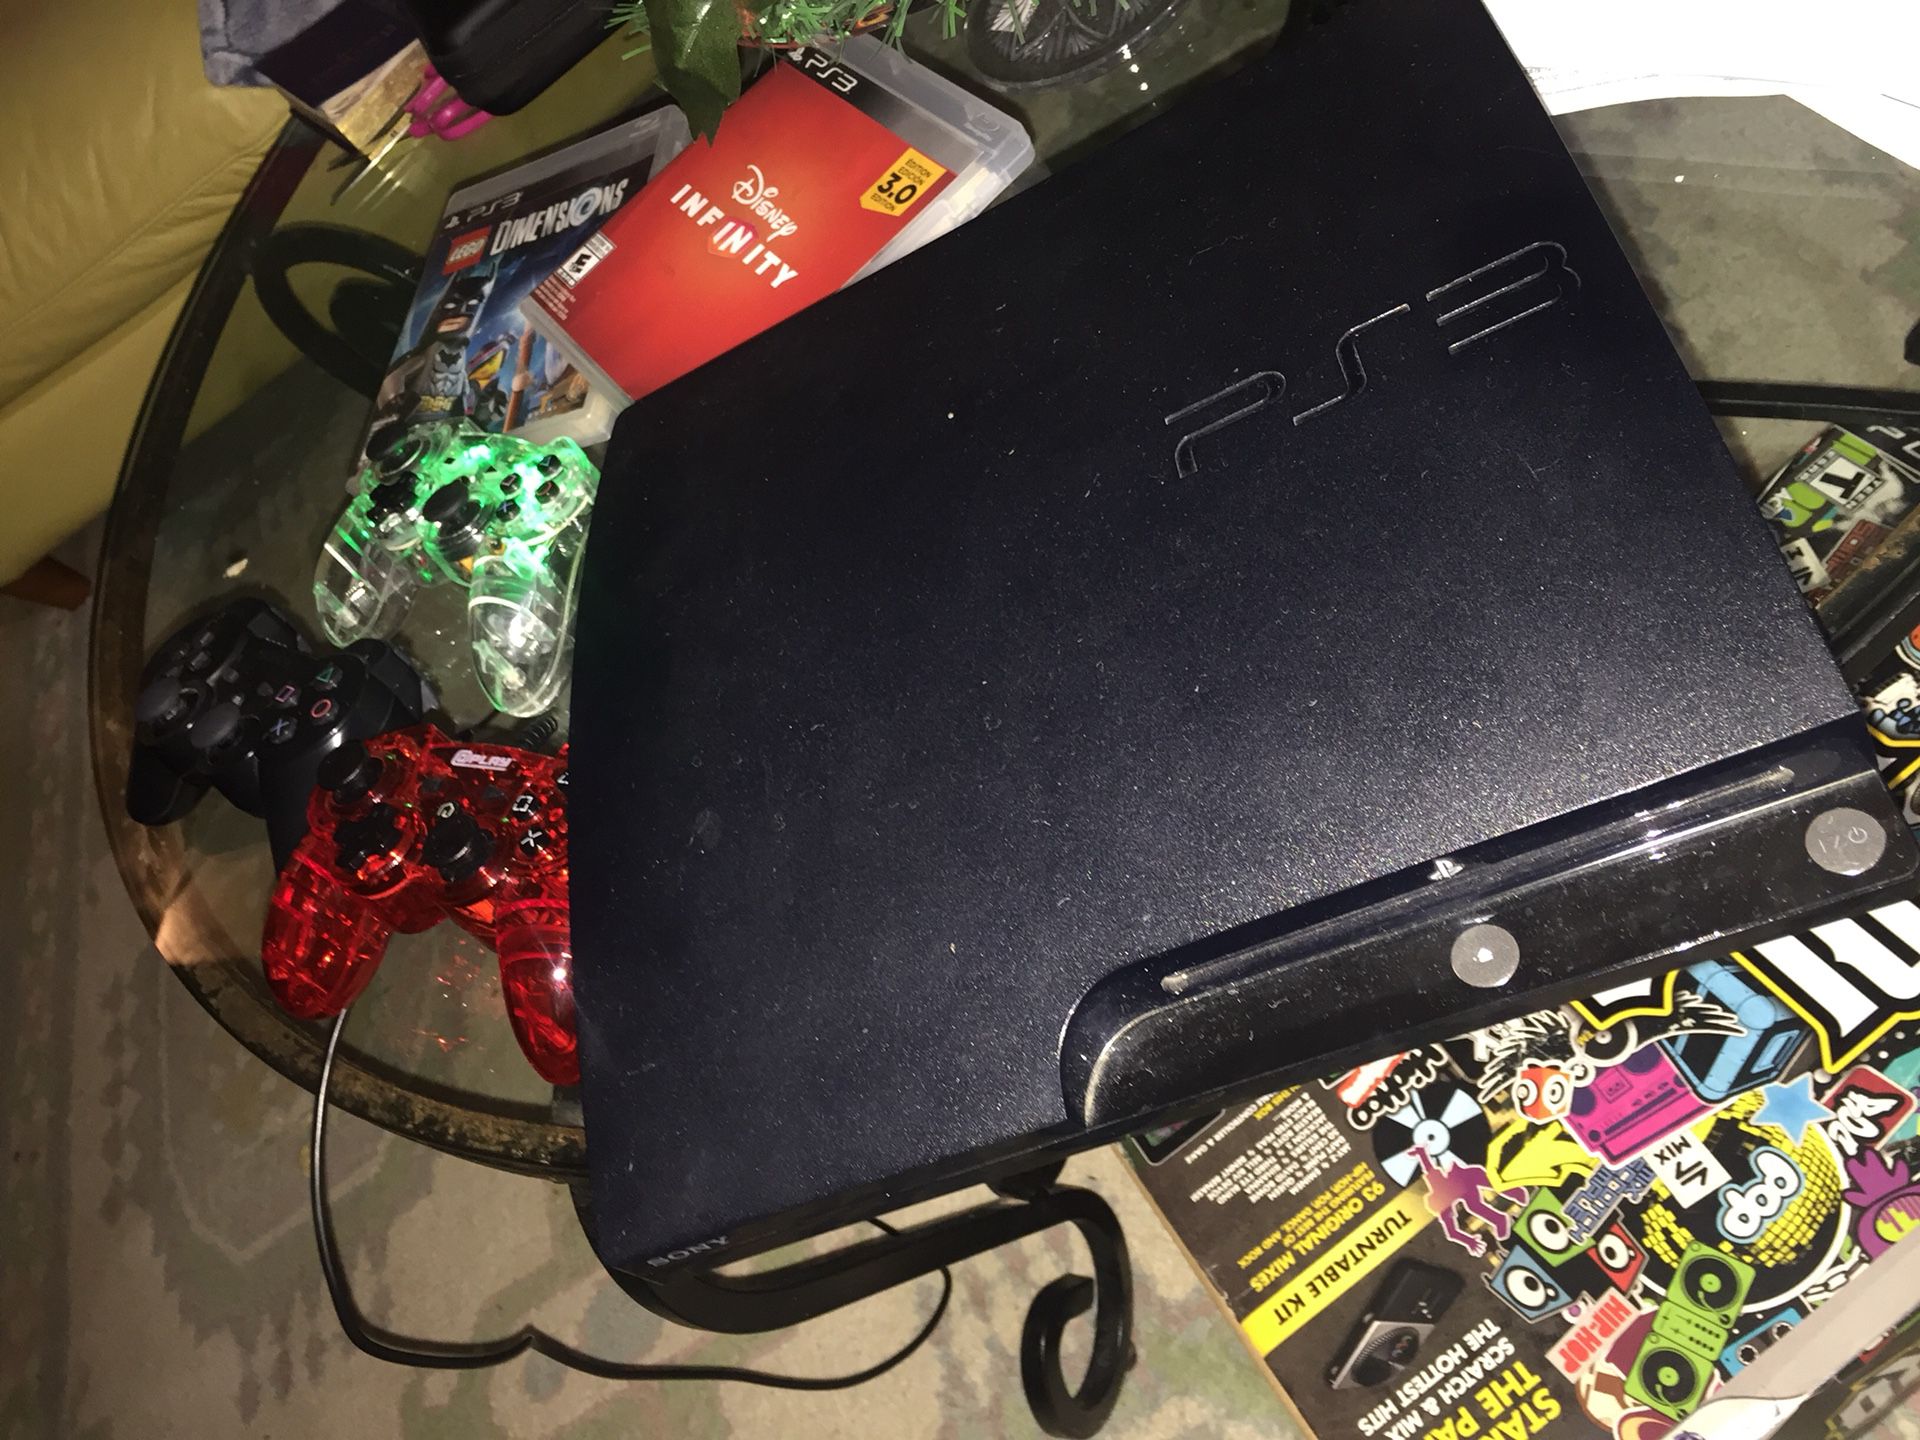 PlayStation 3 complete with games inside and 3 controllers